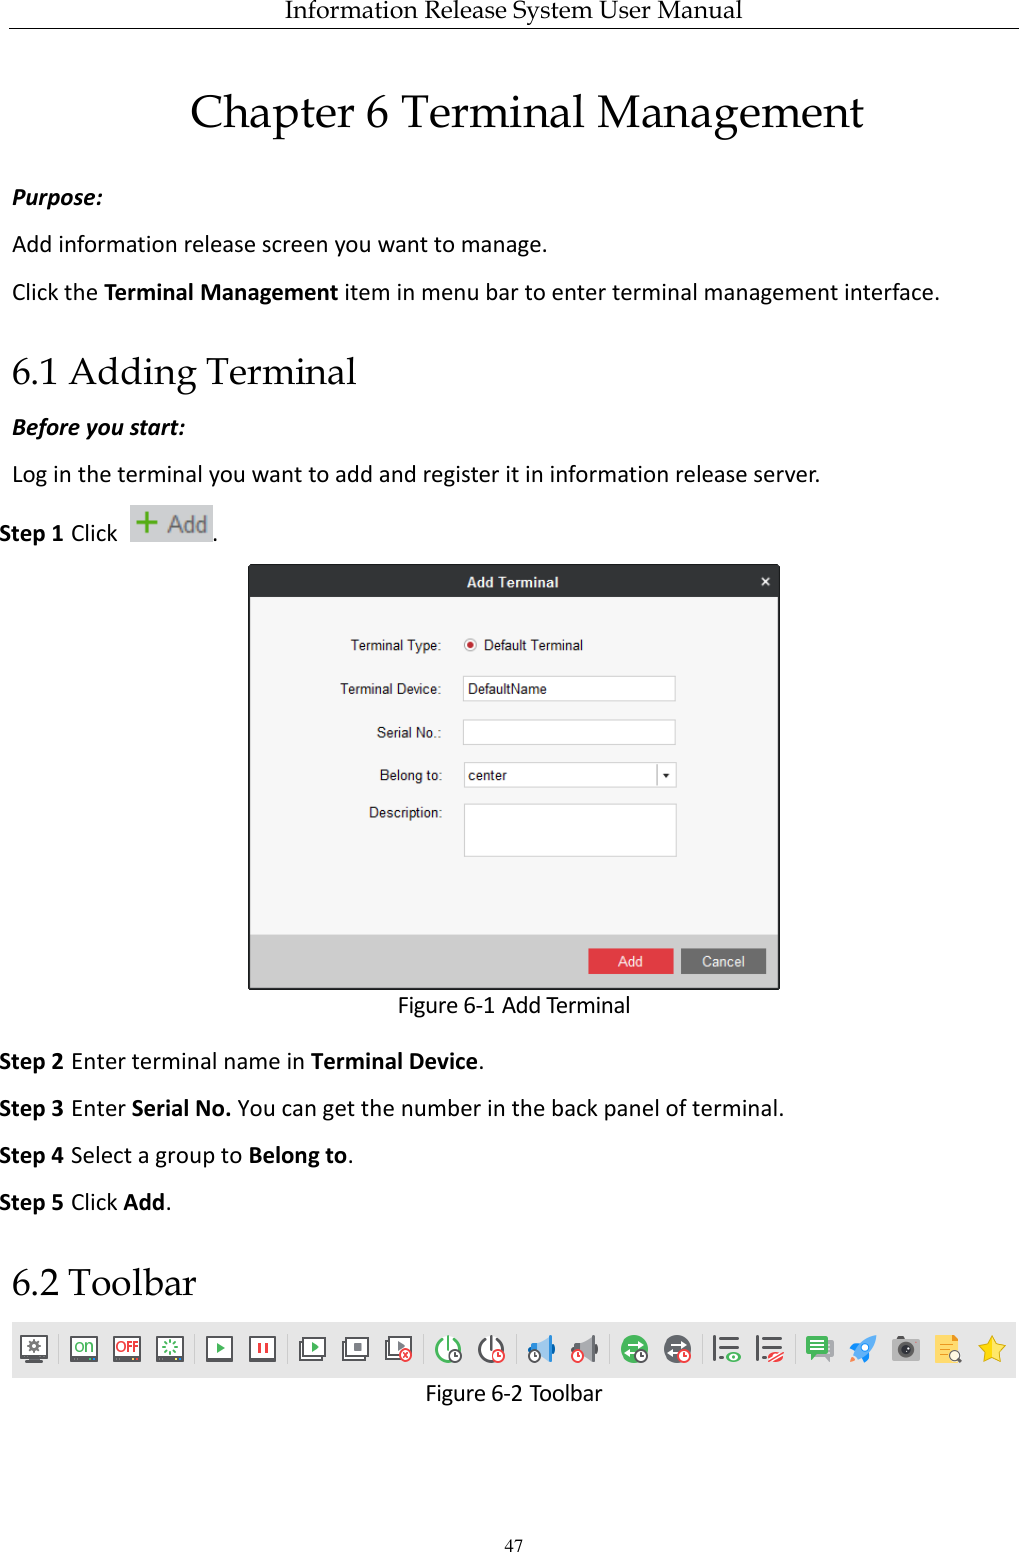 Information Release System User Manual 47 Chapter 6 Terminal Management Purpose: Add information release screen you want to manage. Click the Terminal Management item in menu bar to enter terminal management interface. 6.1 Adding Terminal Before you start: Log in the terminal you want to add and register it in information release server. Step 1 Click  .  Figure 6-1 Add Terminal Step 2 Enter terminal name in Terminal Device. Step 3 Enter Serial No. You can get the number in the back panel of terminal. Step 4 Select a group to Belong to. Step 5 Click Add. 6.2 Toolbar  Figure 6-2 Toolbar 